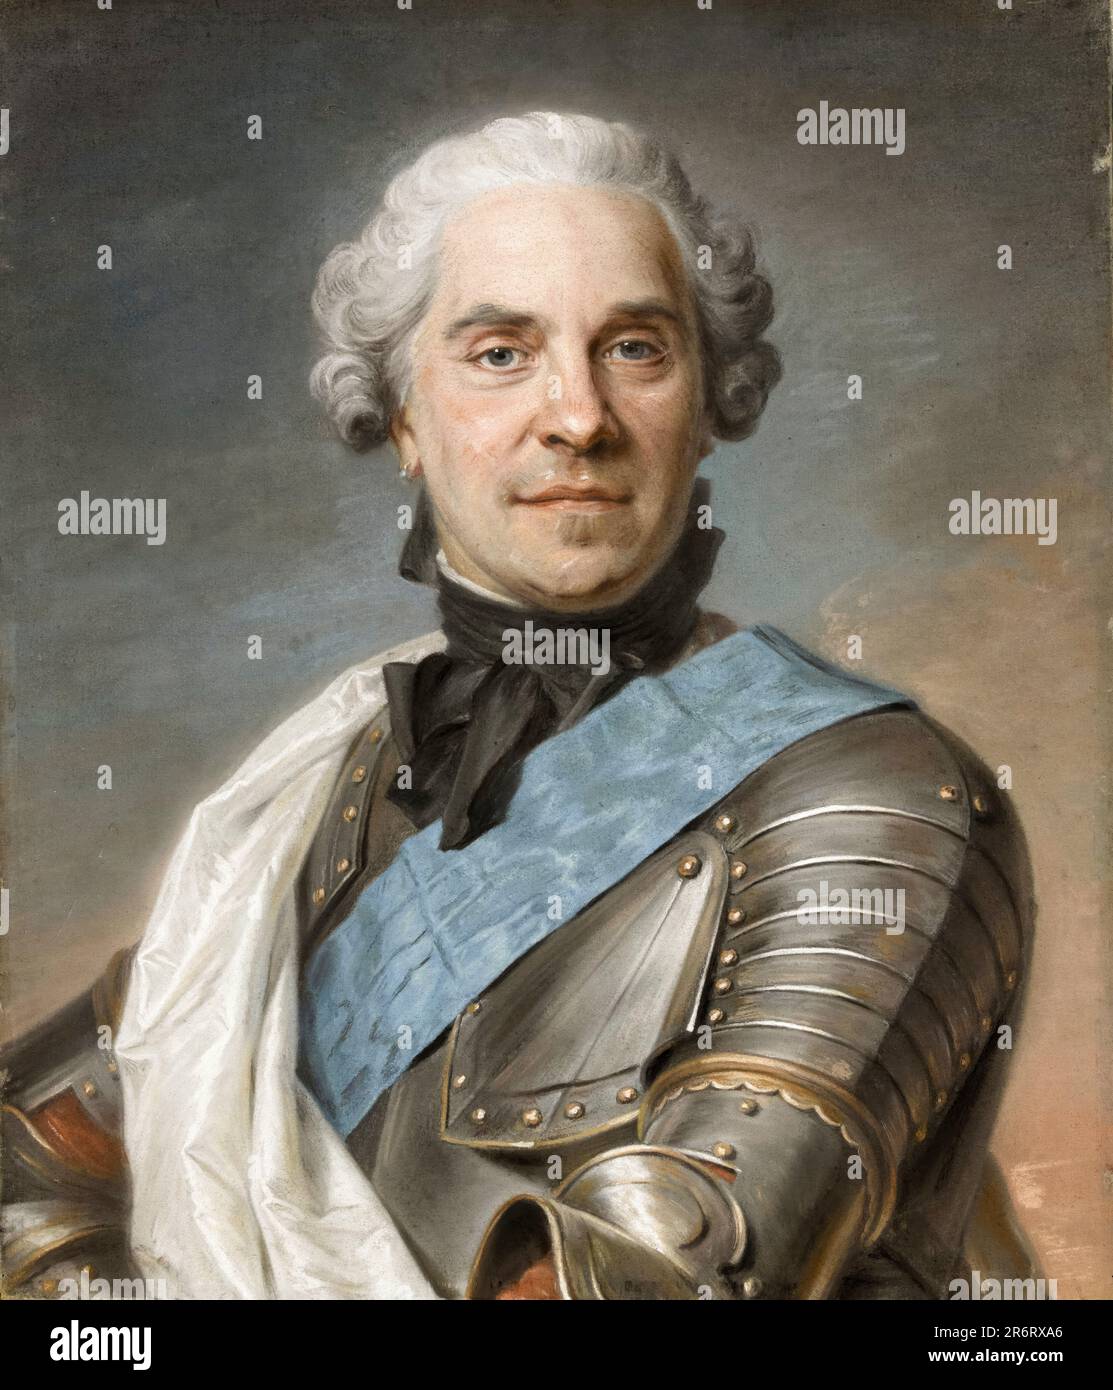 The Marechal de Saxe. Maurice, Count of Saxony (1696-1750), Marshal General of France, portrait drawing in pastel by Maurice Quentin de La Tour, 1725-1750 Stock Photo